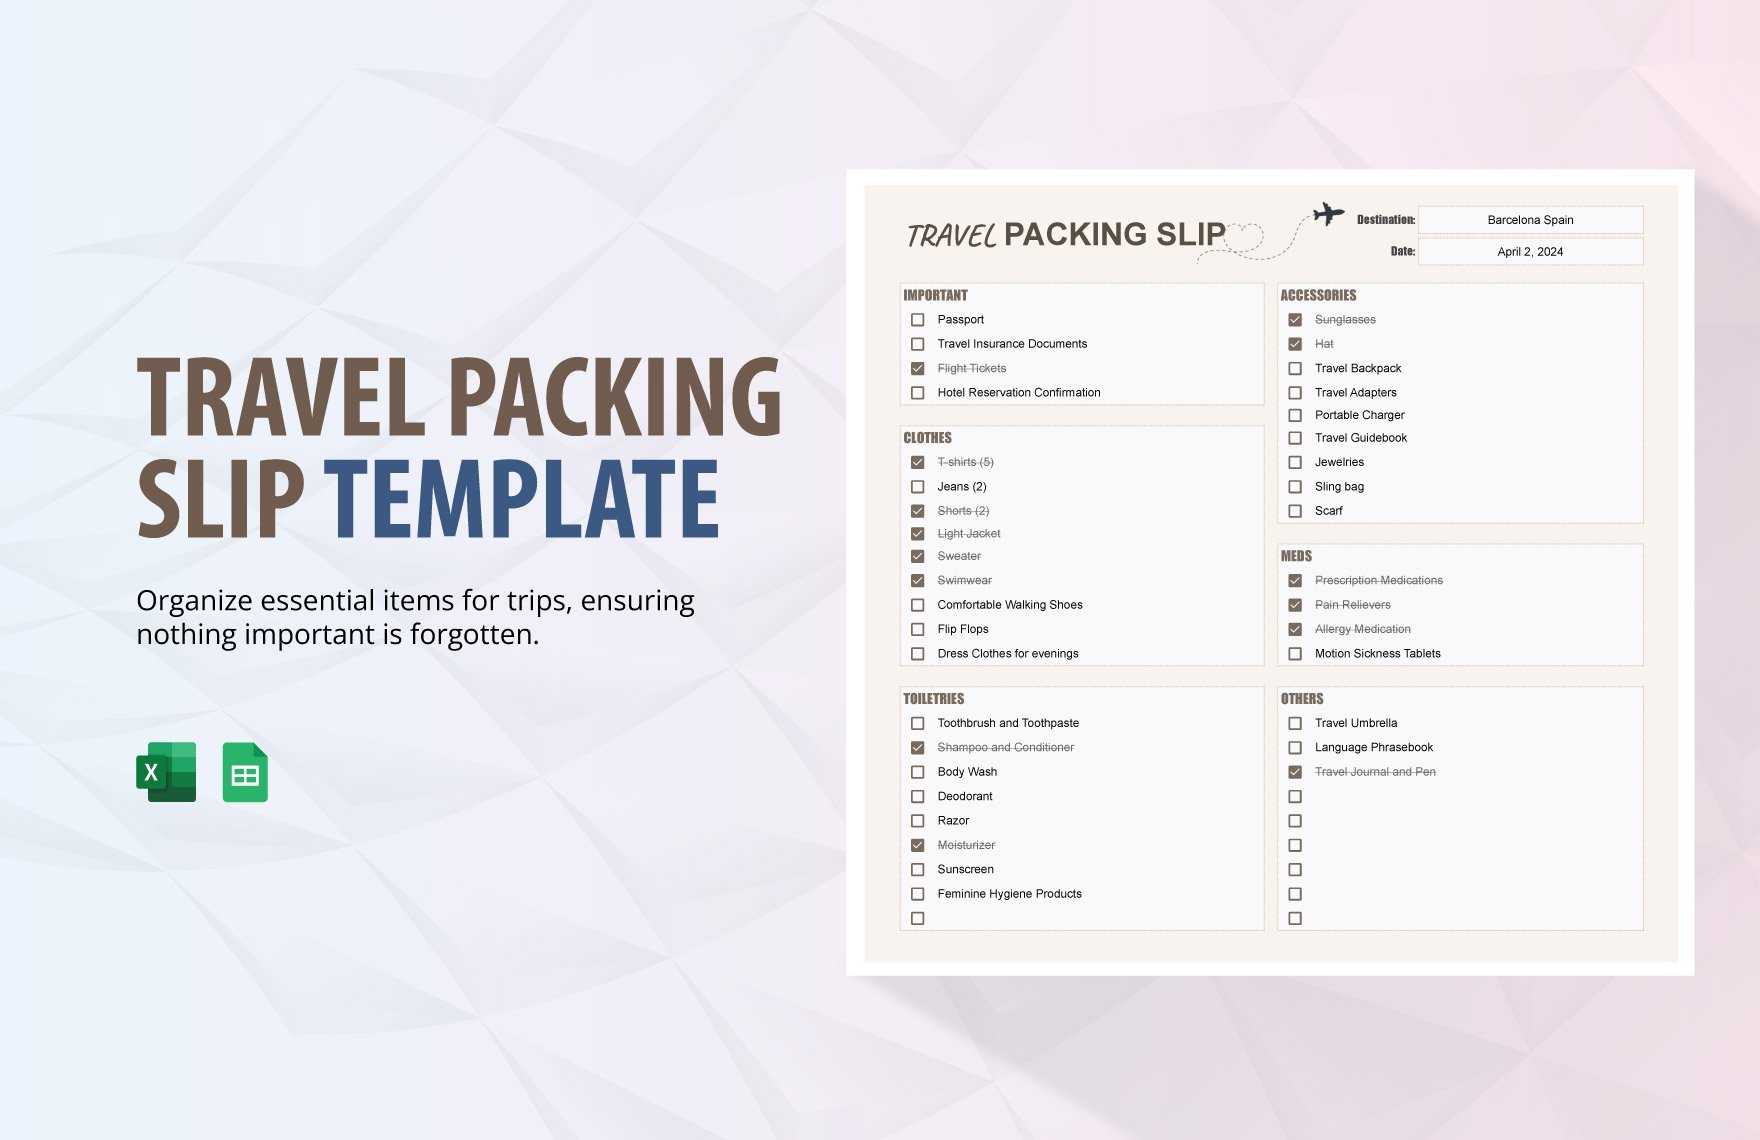 Travel Packing Slip Template in Excel, Google Sheets